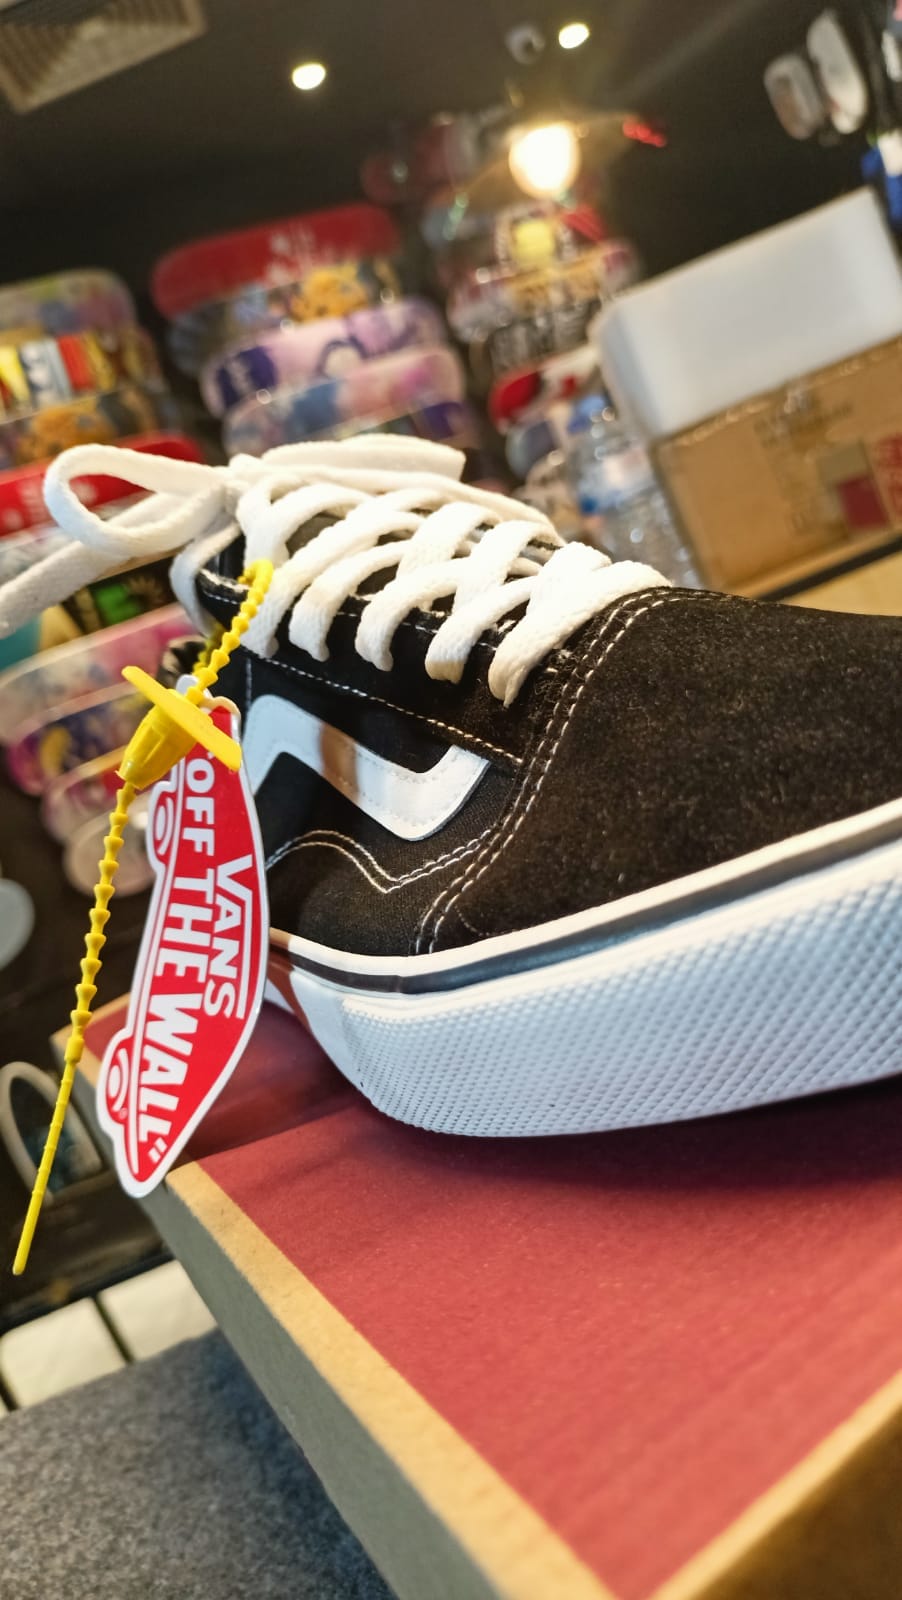 The Vans shoe is designed to provide optimal padding, grip, stability, and control.